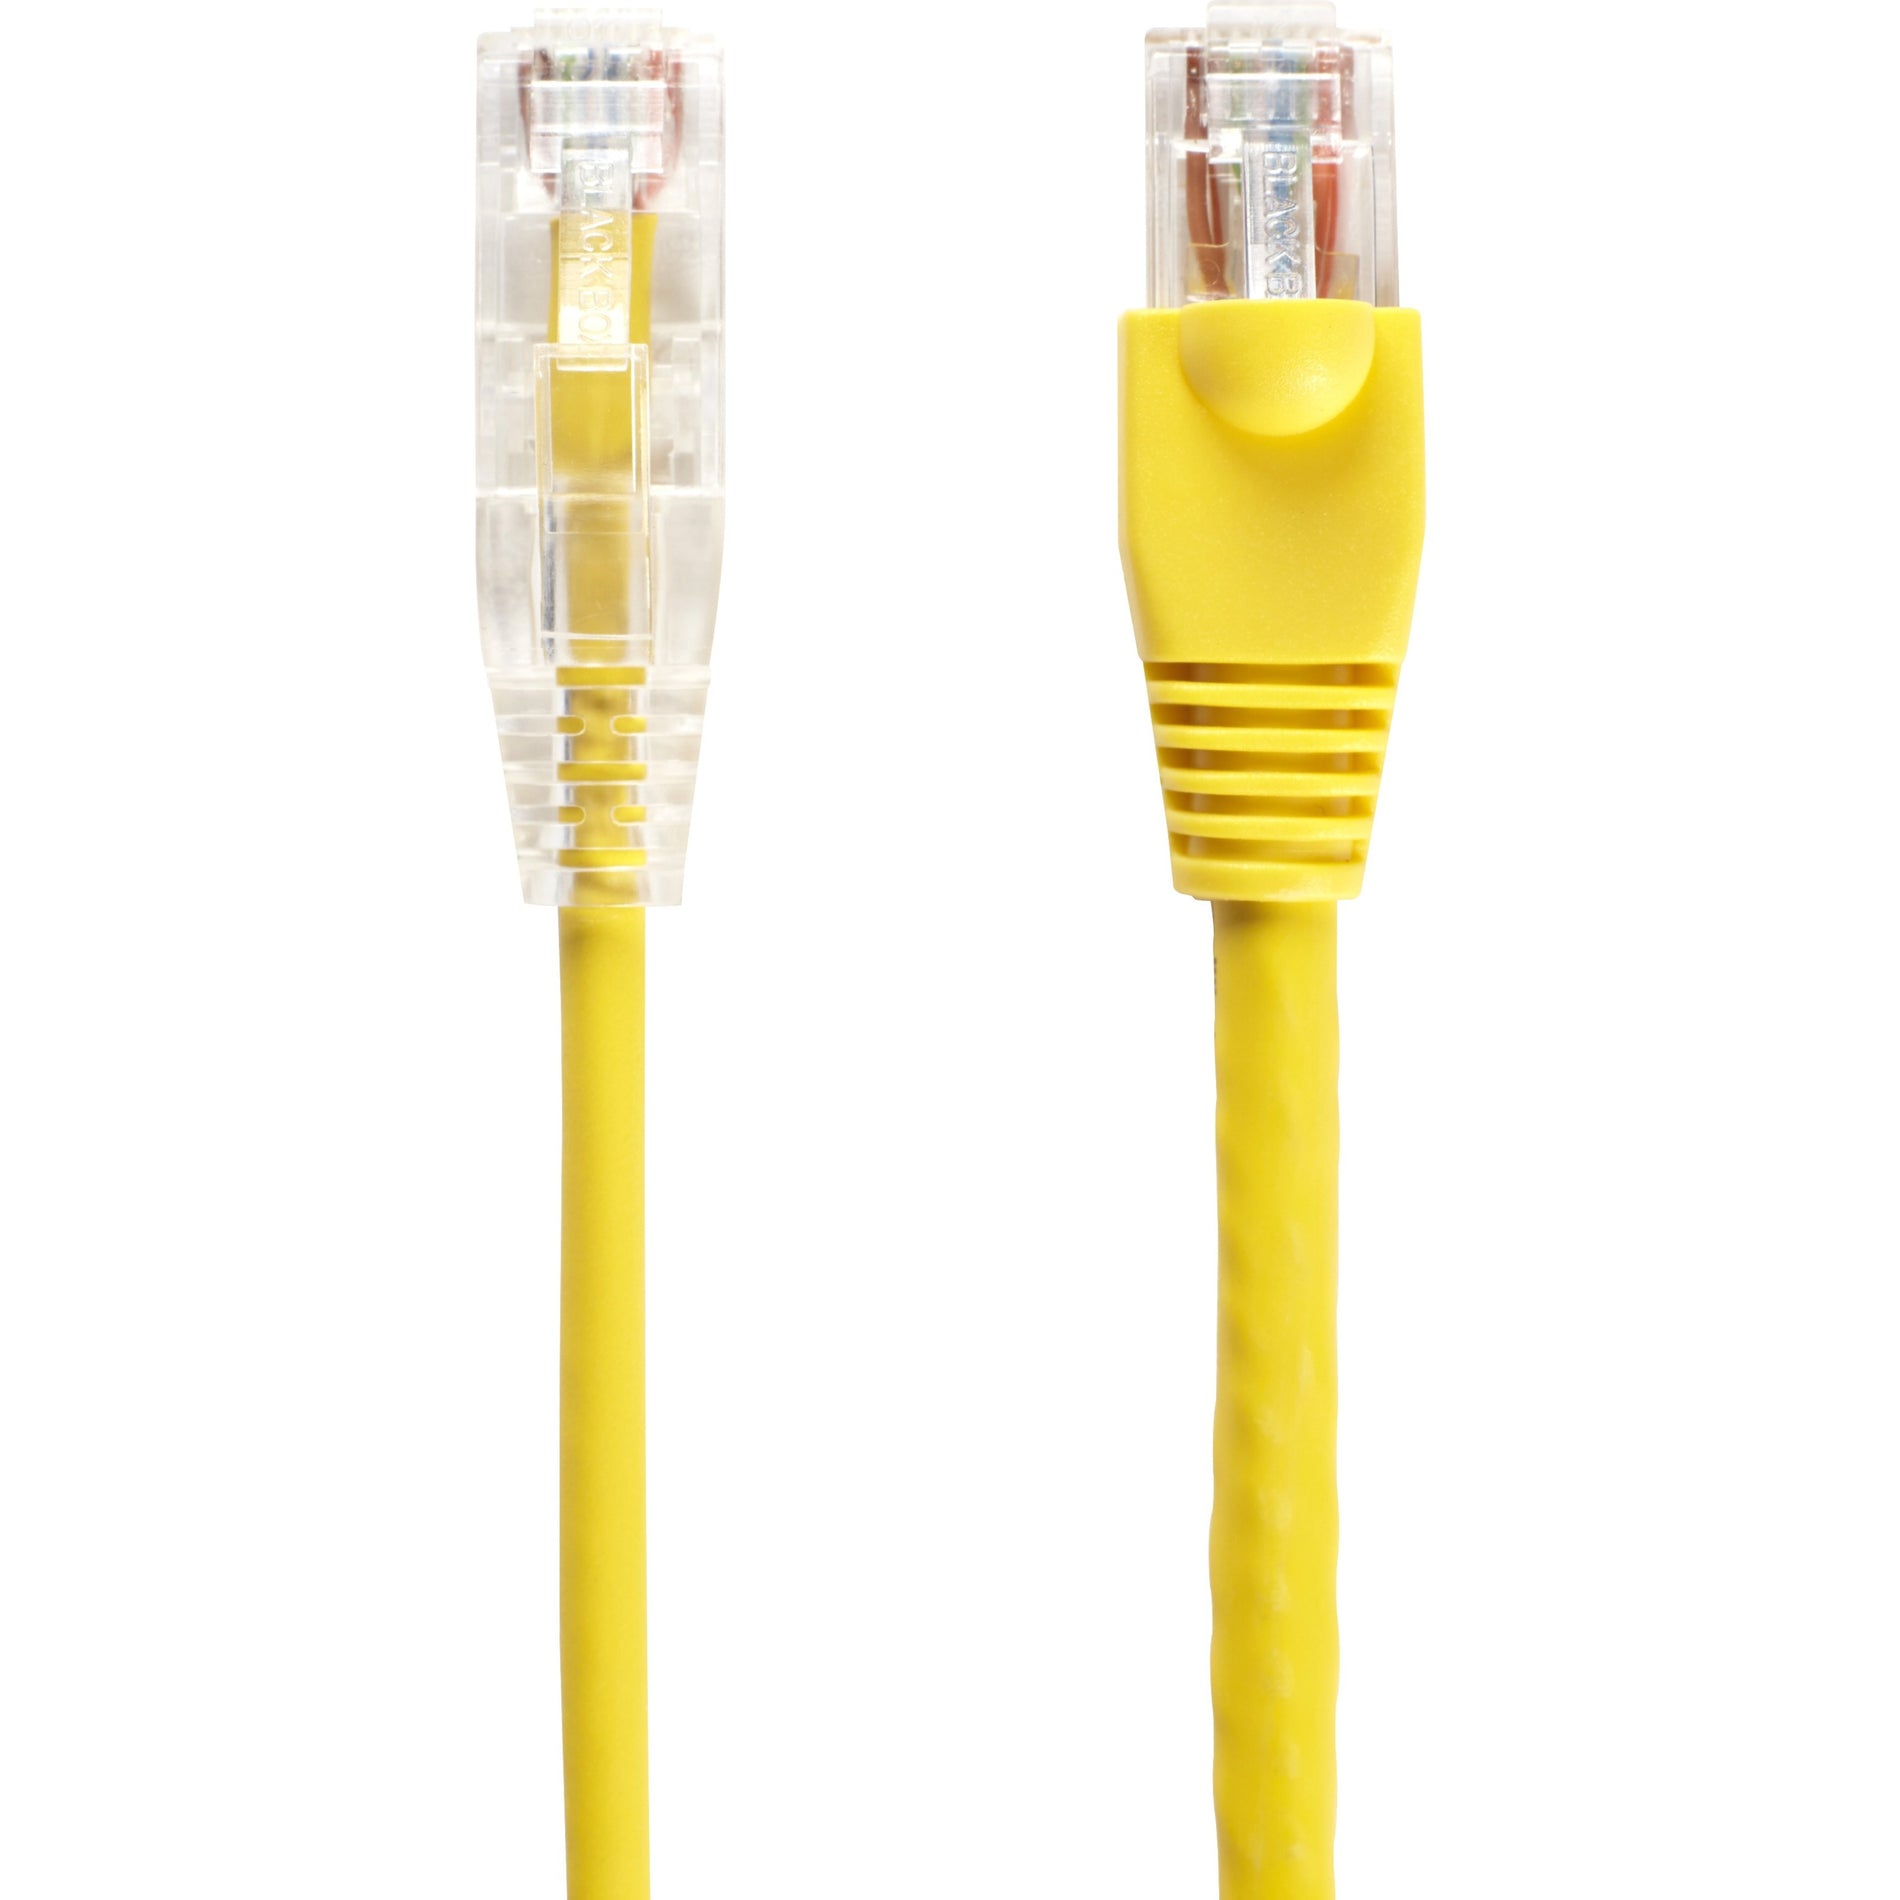 Black Box C6PC28-YL-12 Slim-Net Cat.6 UTP Patch Network Cable, 12 ft, Snagless Boot, 10 Gbit/s Data Transfer Rate, Yellow